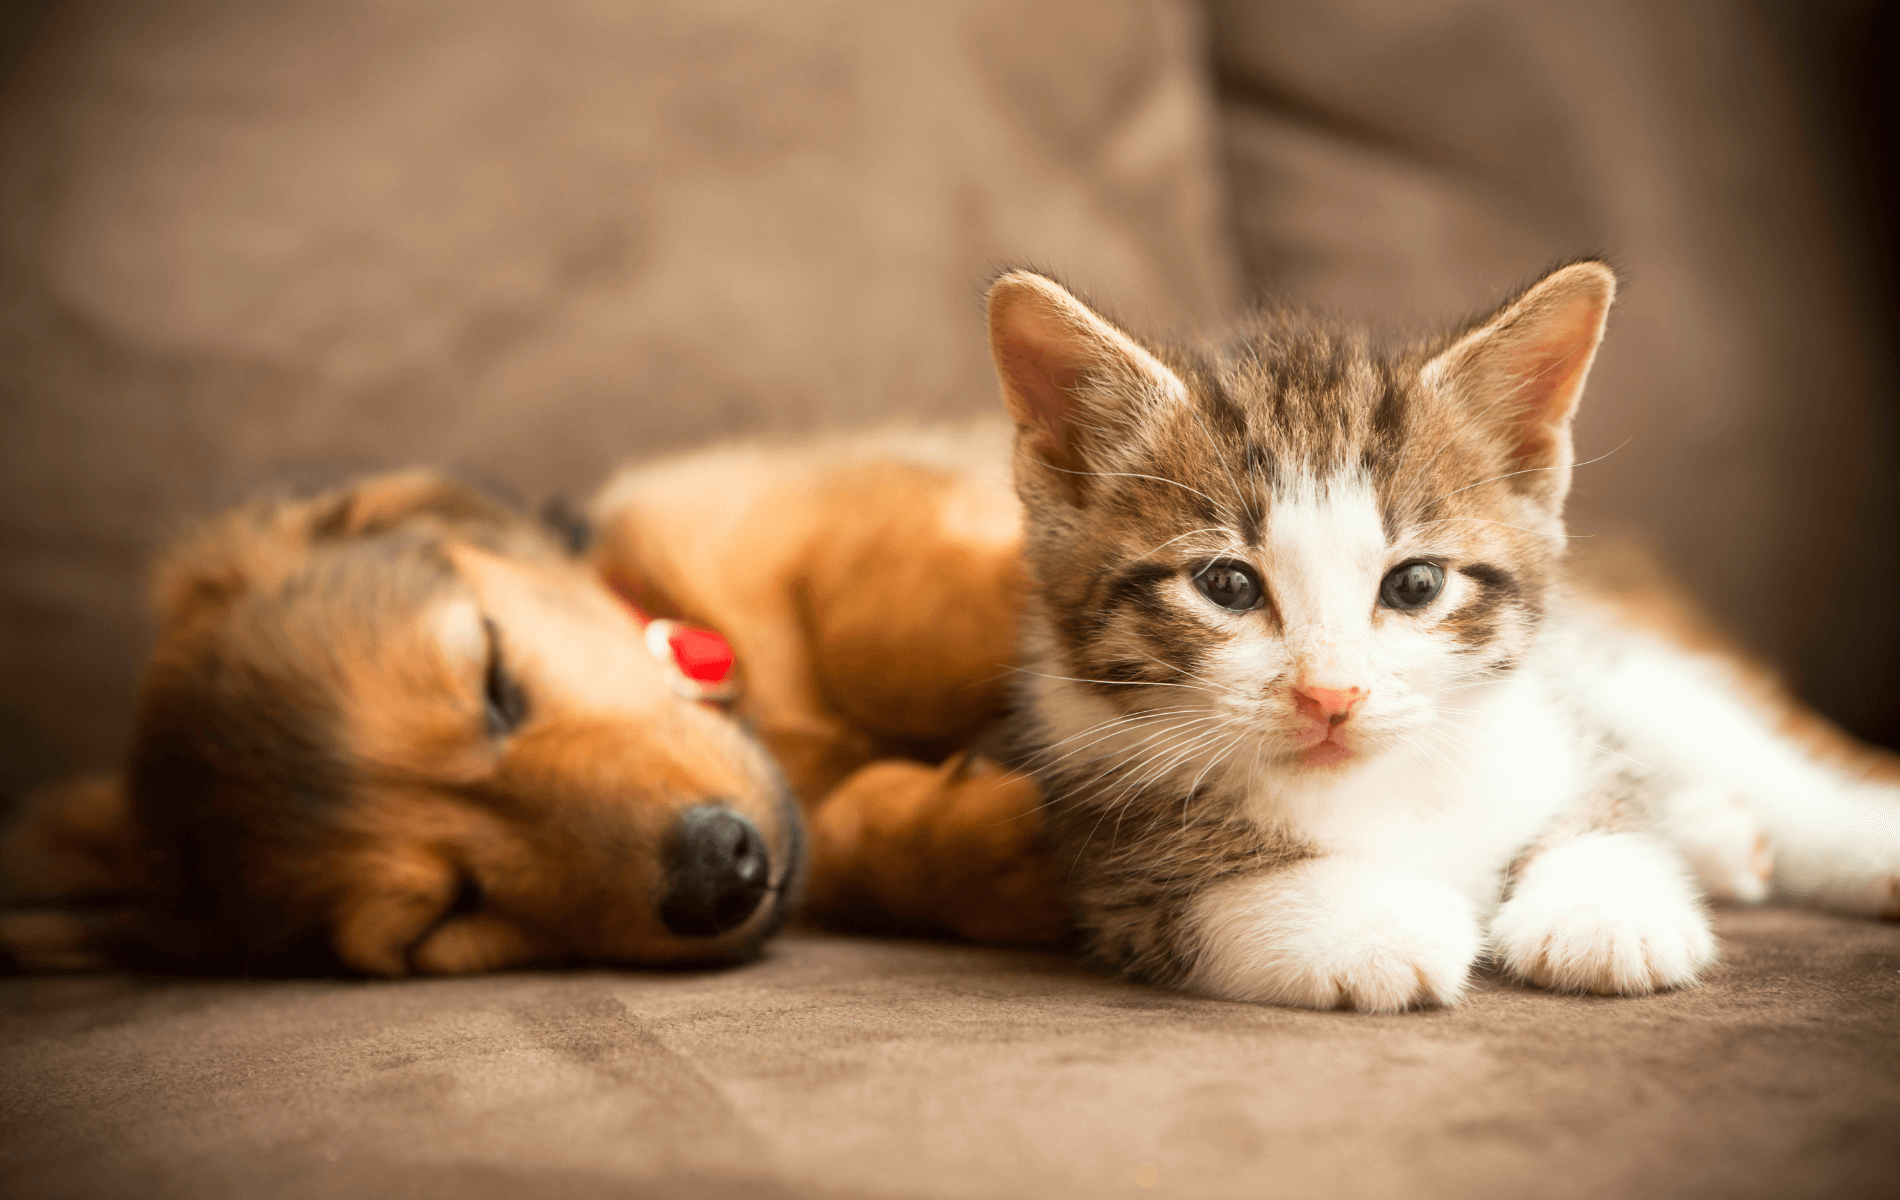 A cat and dog lying on a couch